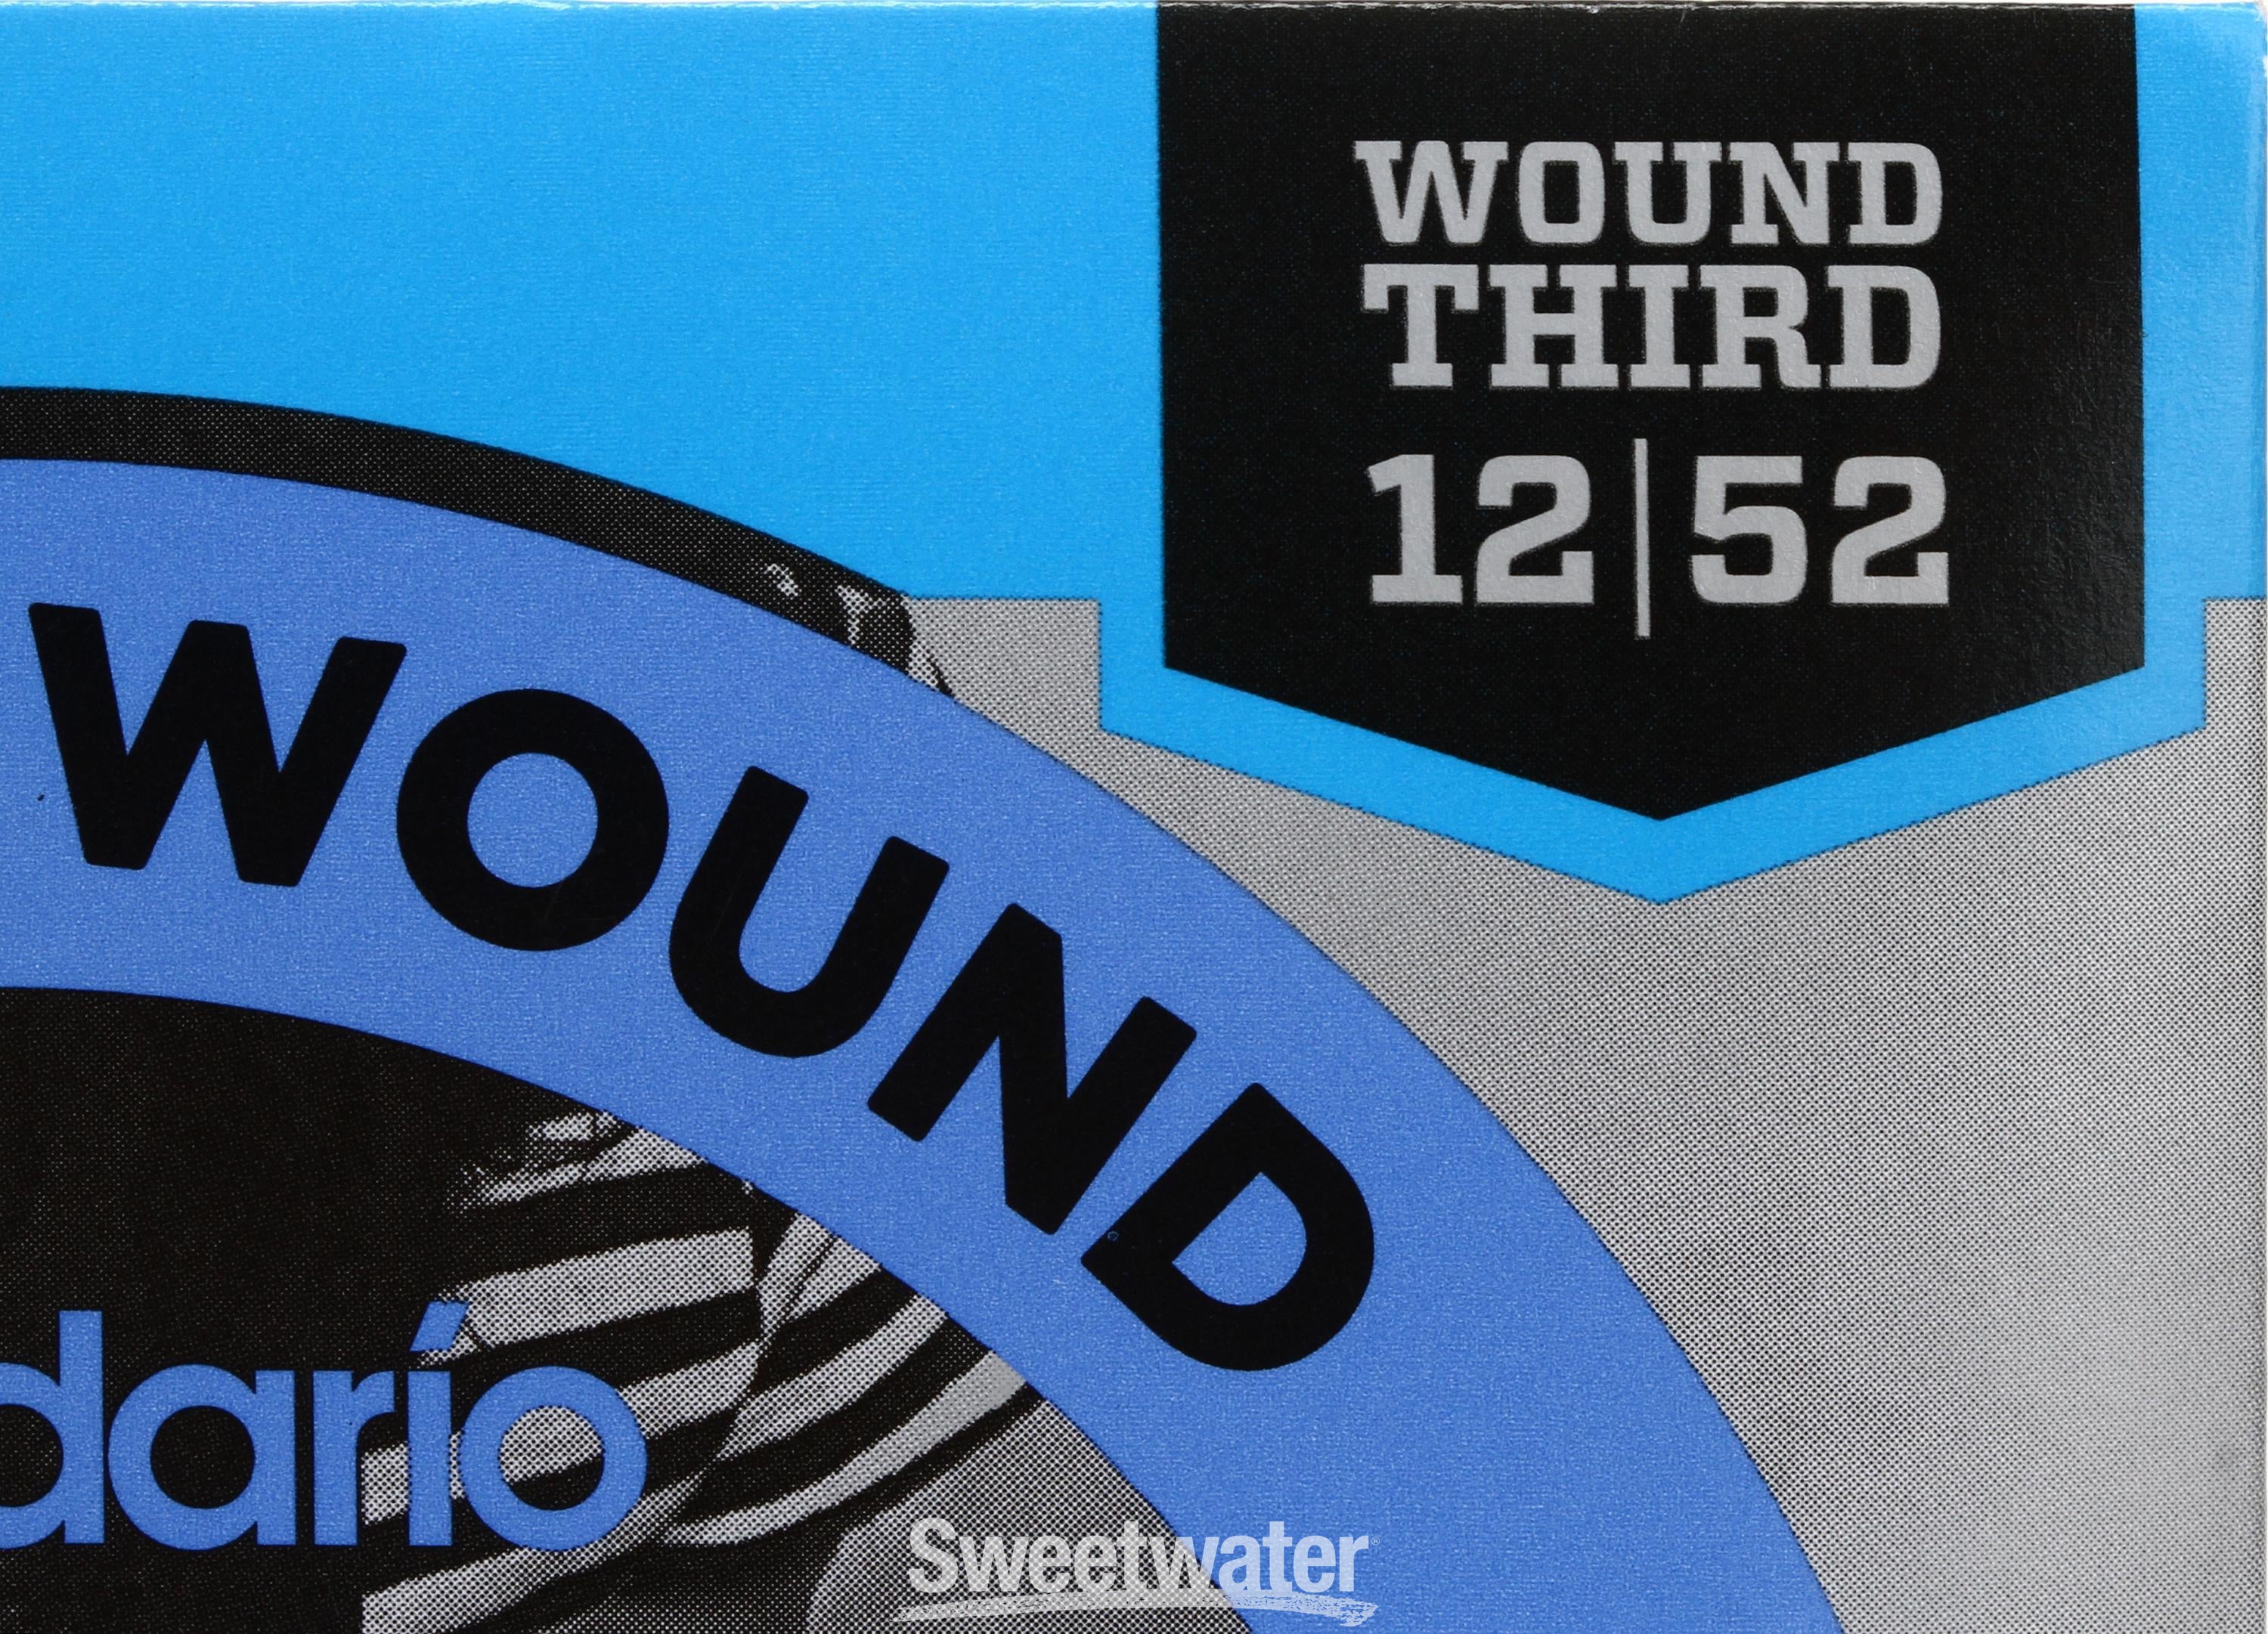 D'Addario EJ21 XL Nickel Wound Electric Guitar Strings - .012-.052 Jazz  Light Wound 3rd | Sweetwater